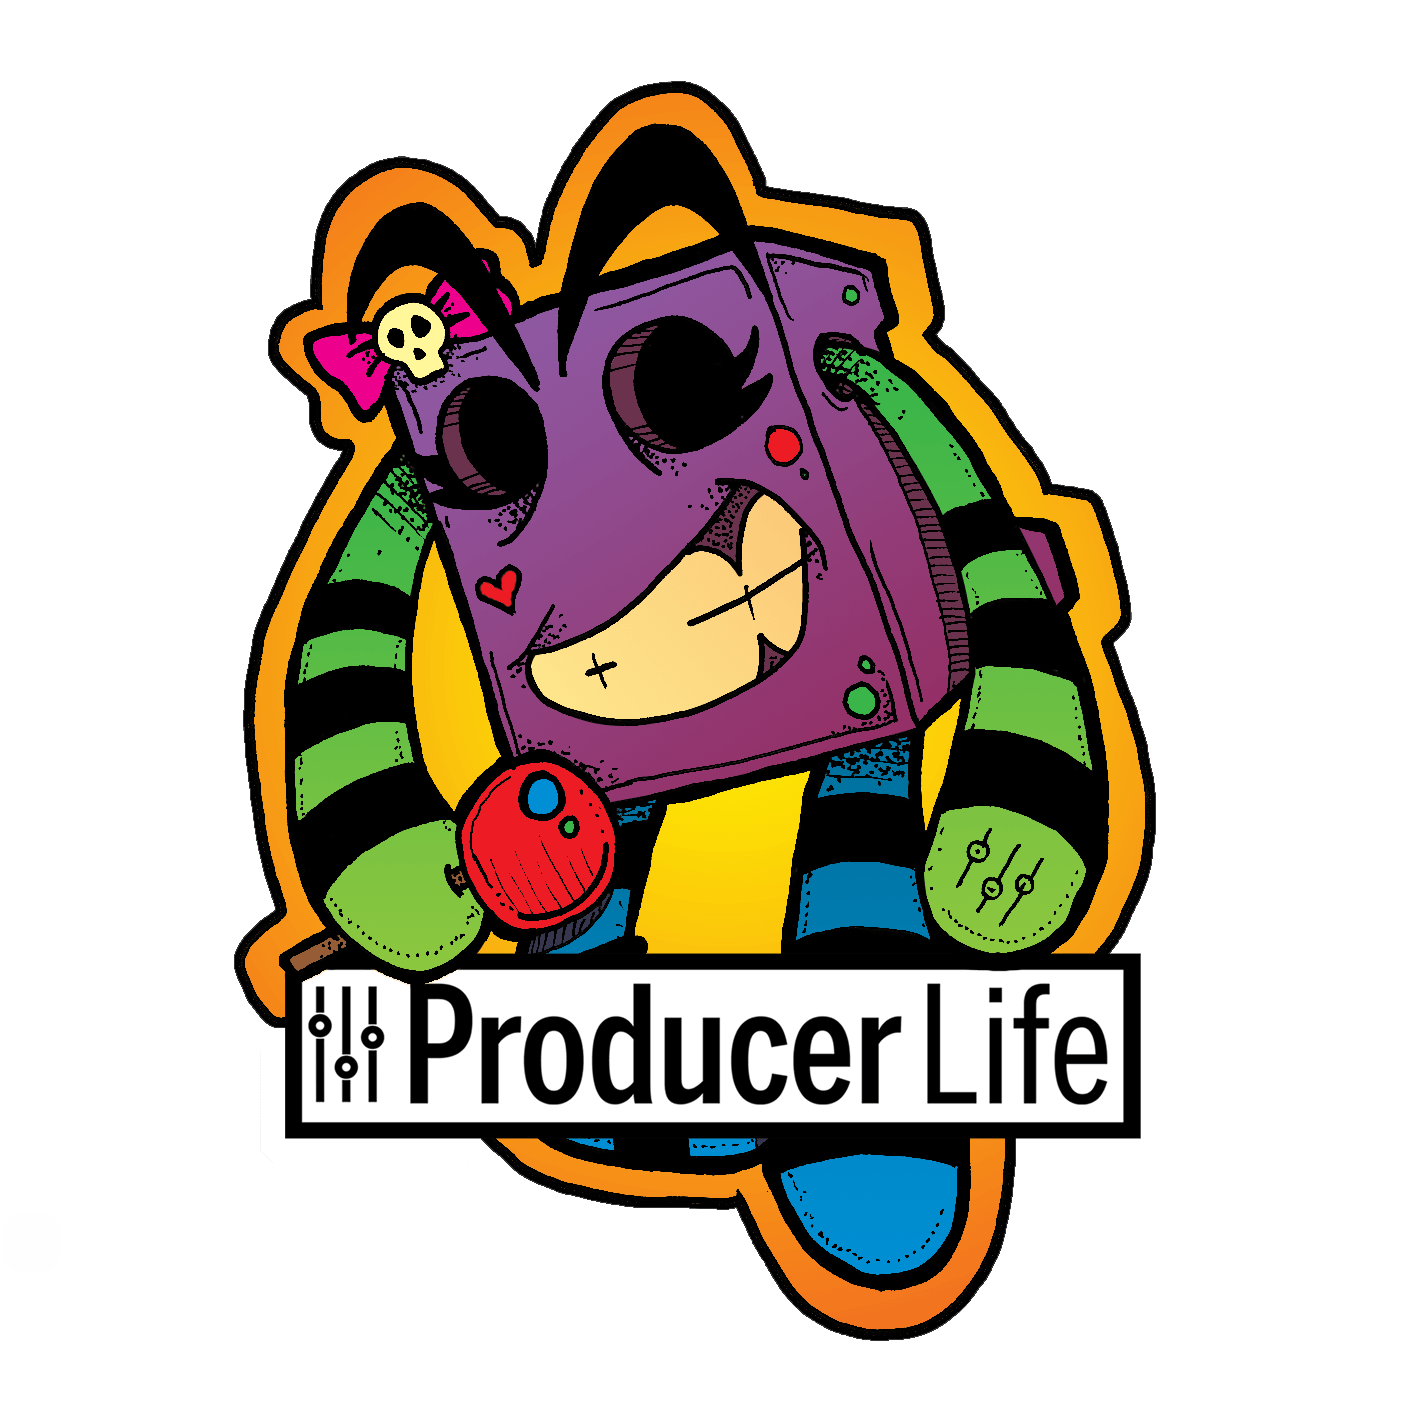 Characters January 5, 2022 https://producerlife.co.uk/characters/